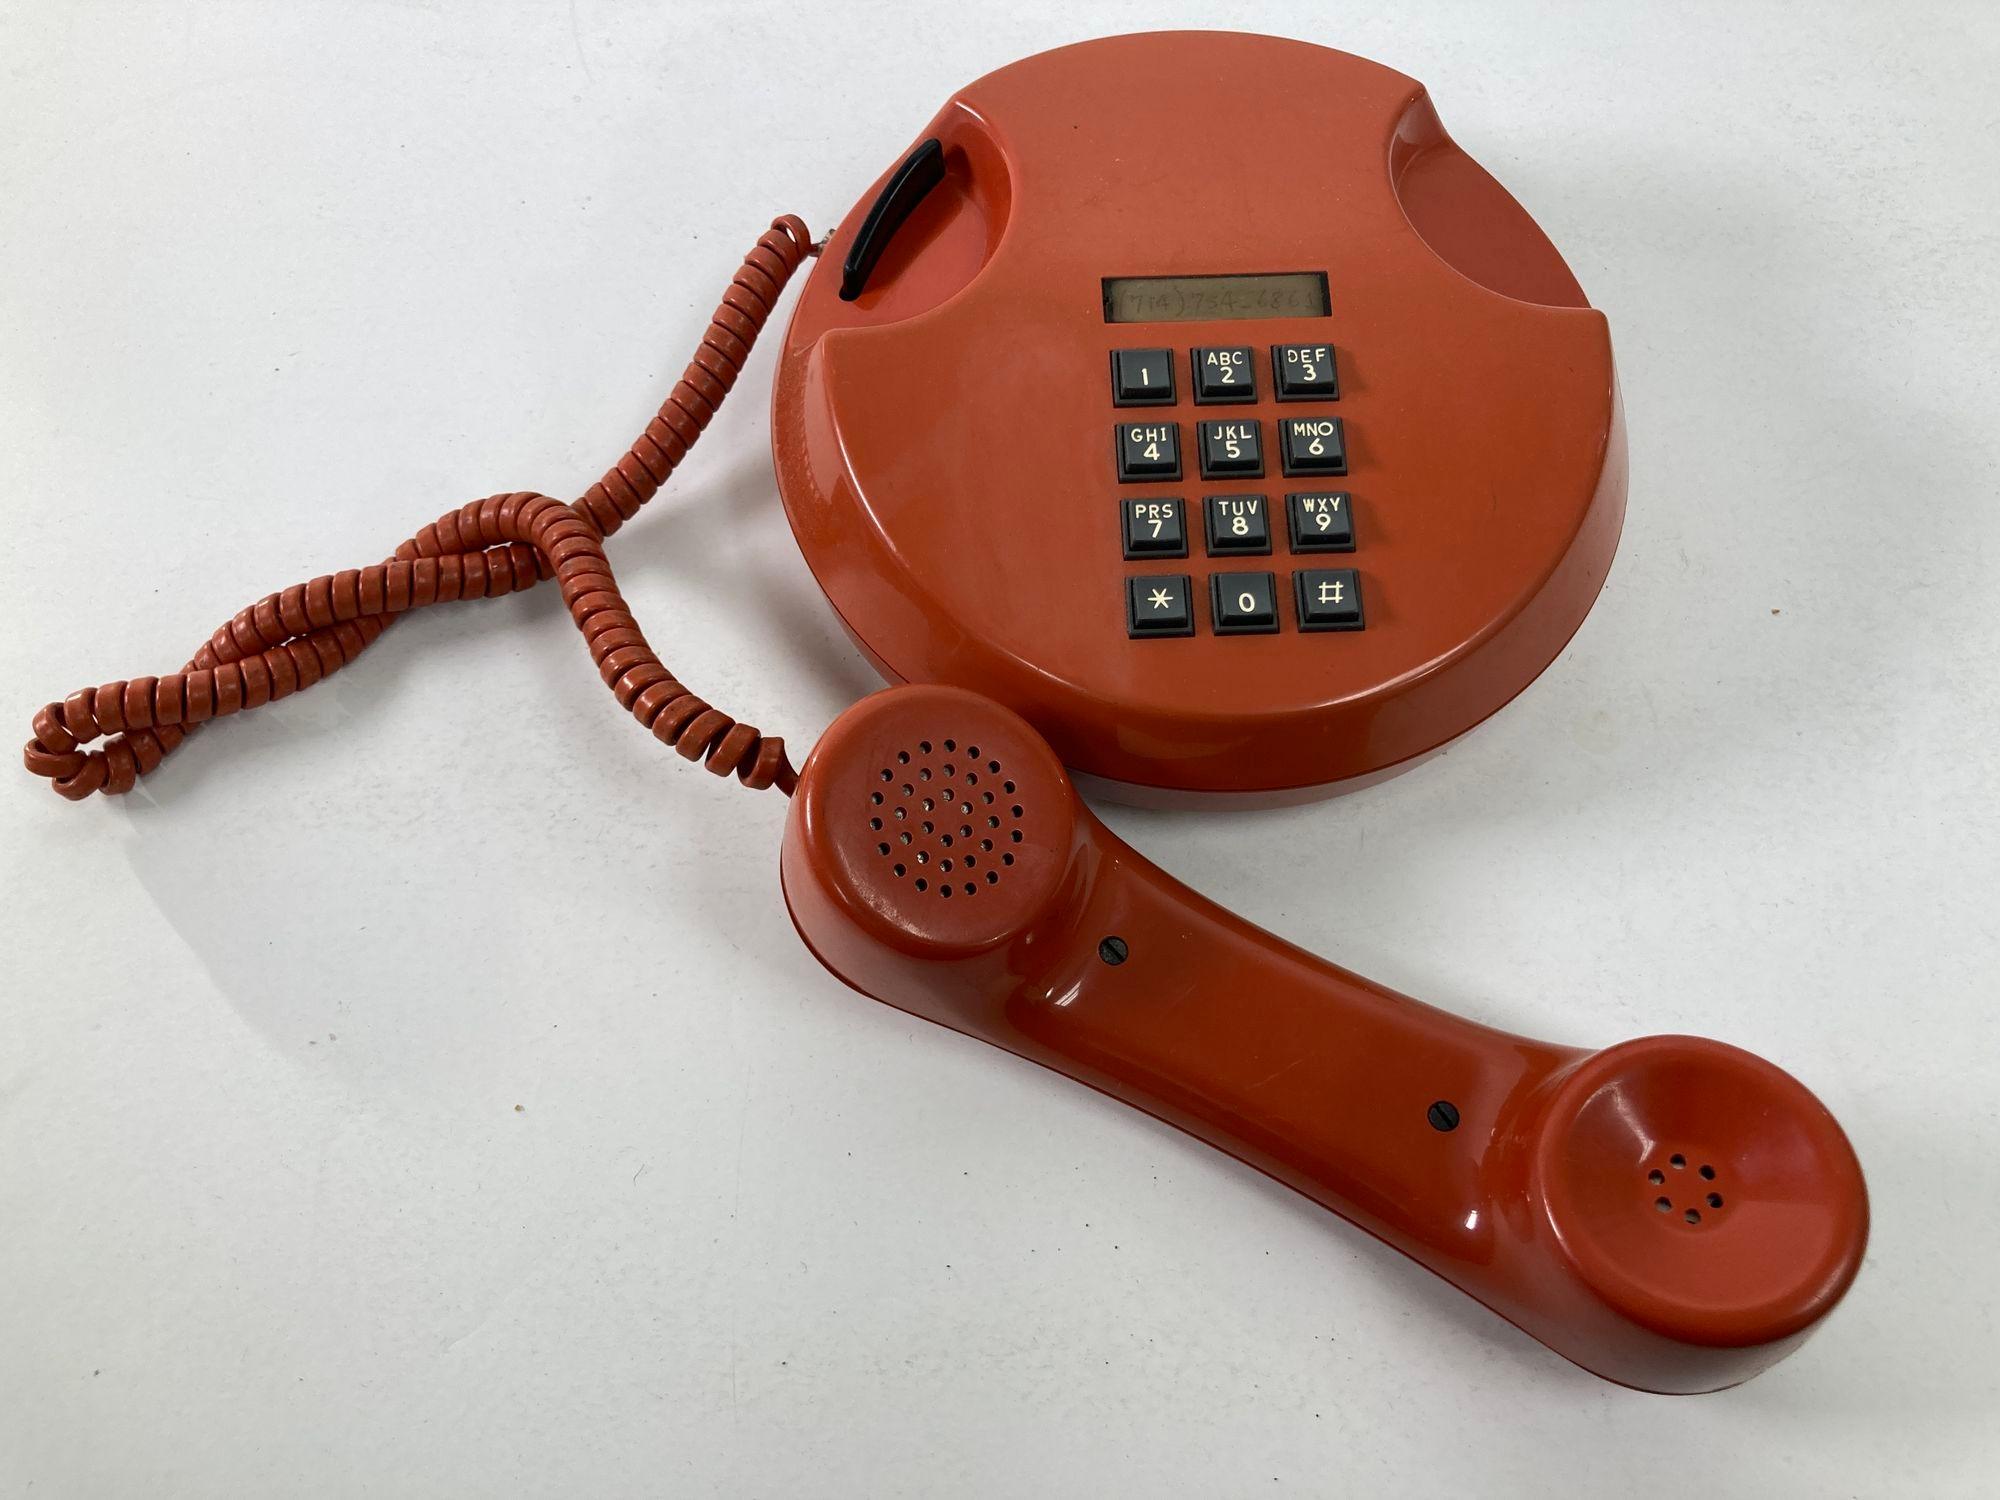 Vintage Retro Push-Button Round Telephone Burnt Orange Color from the, 70s 8